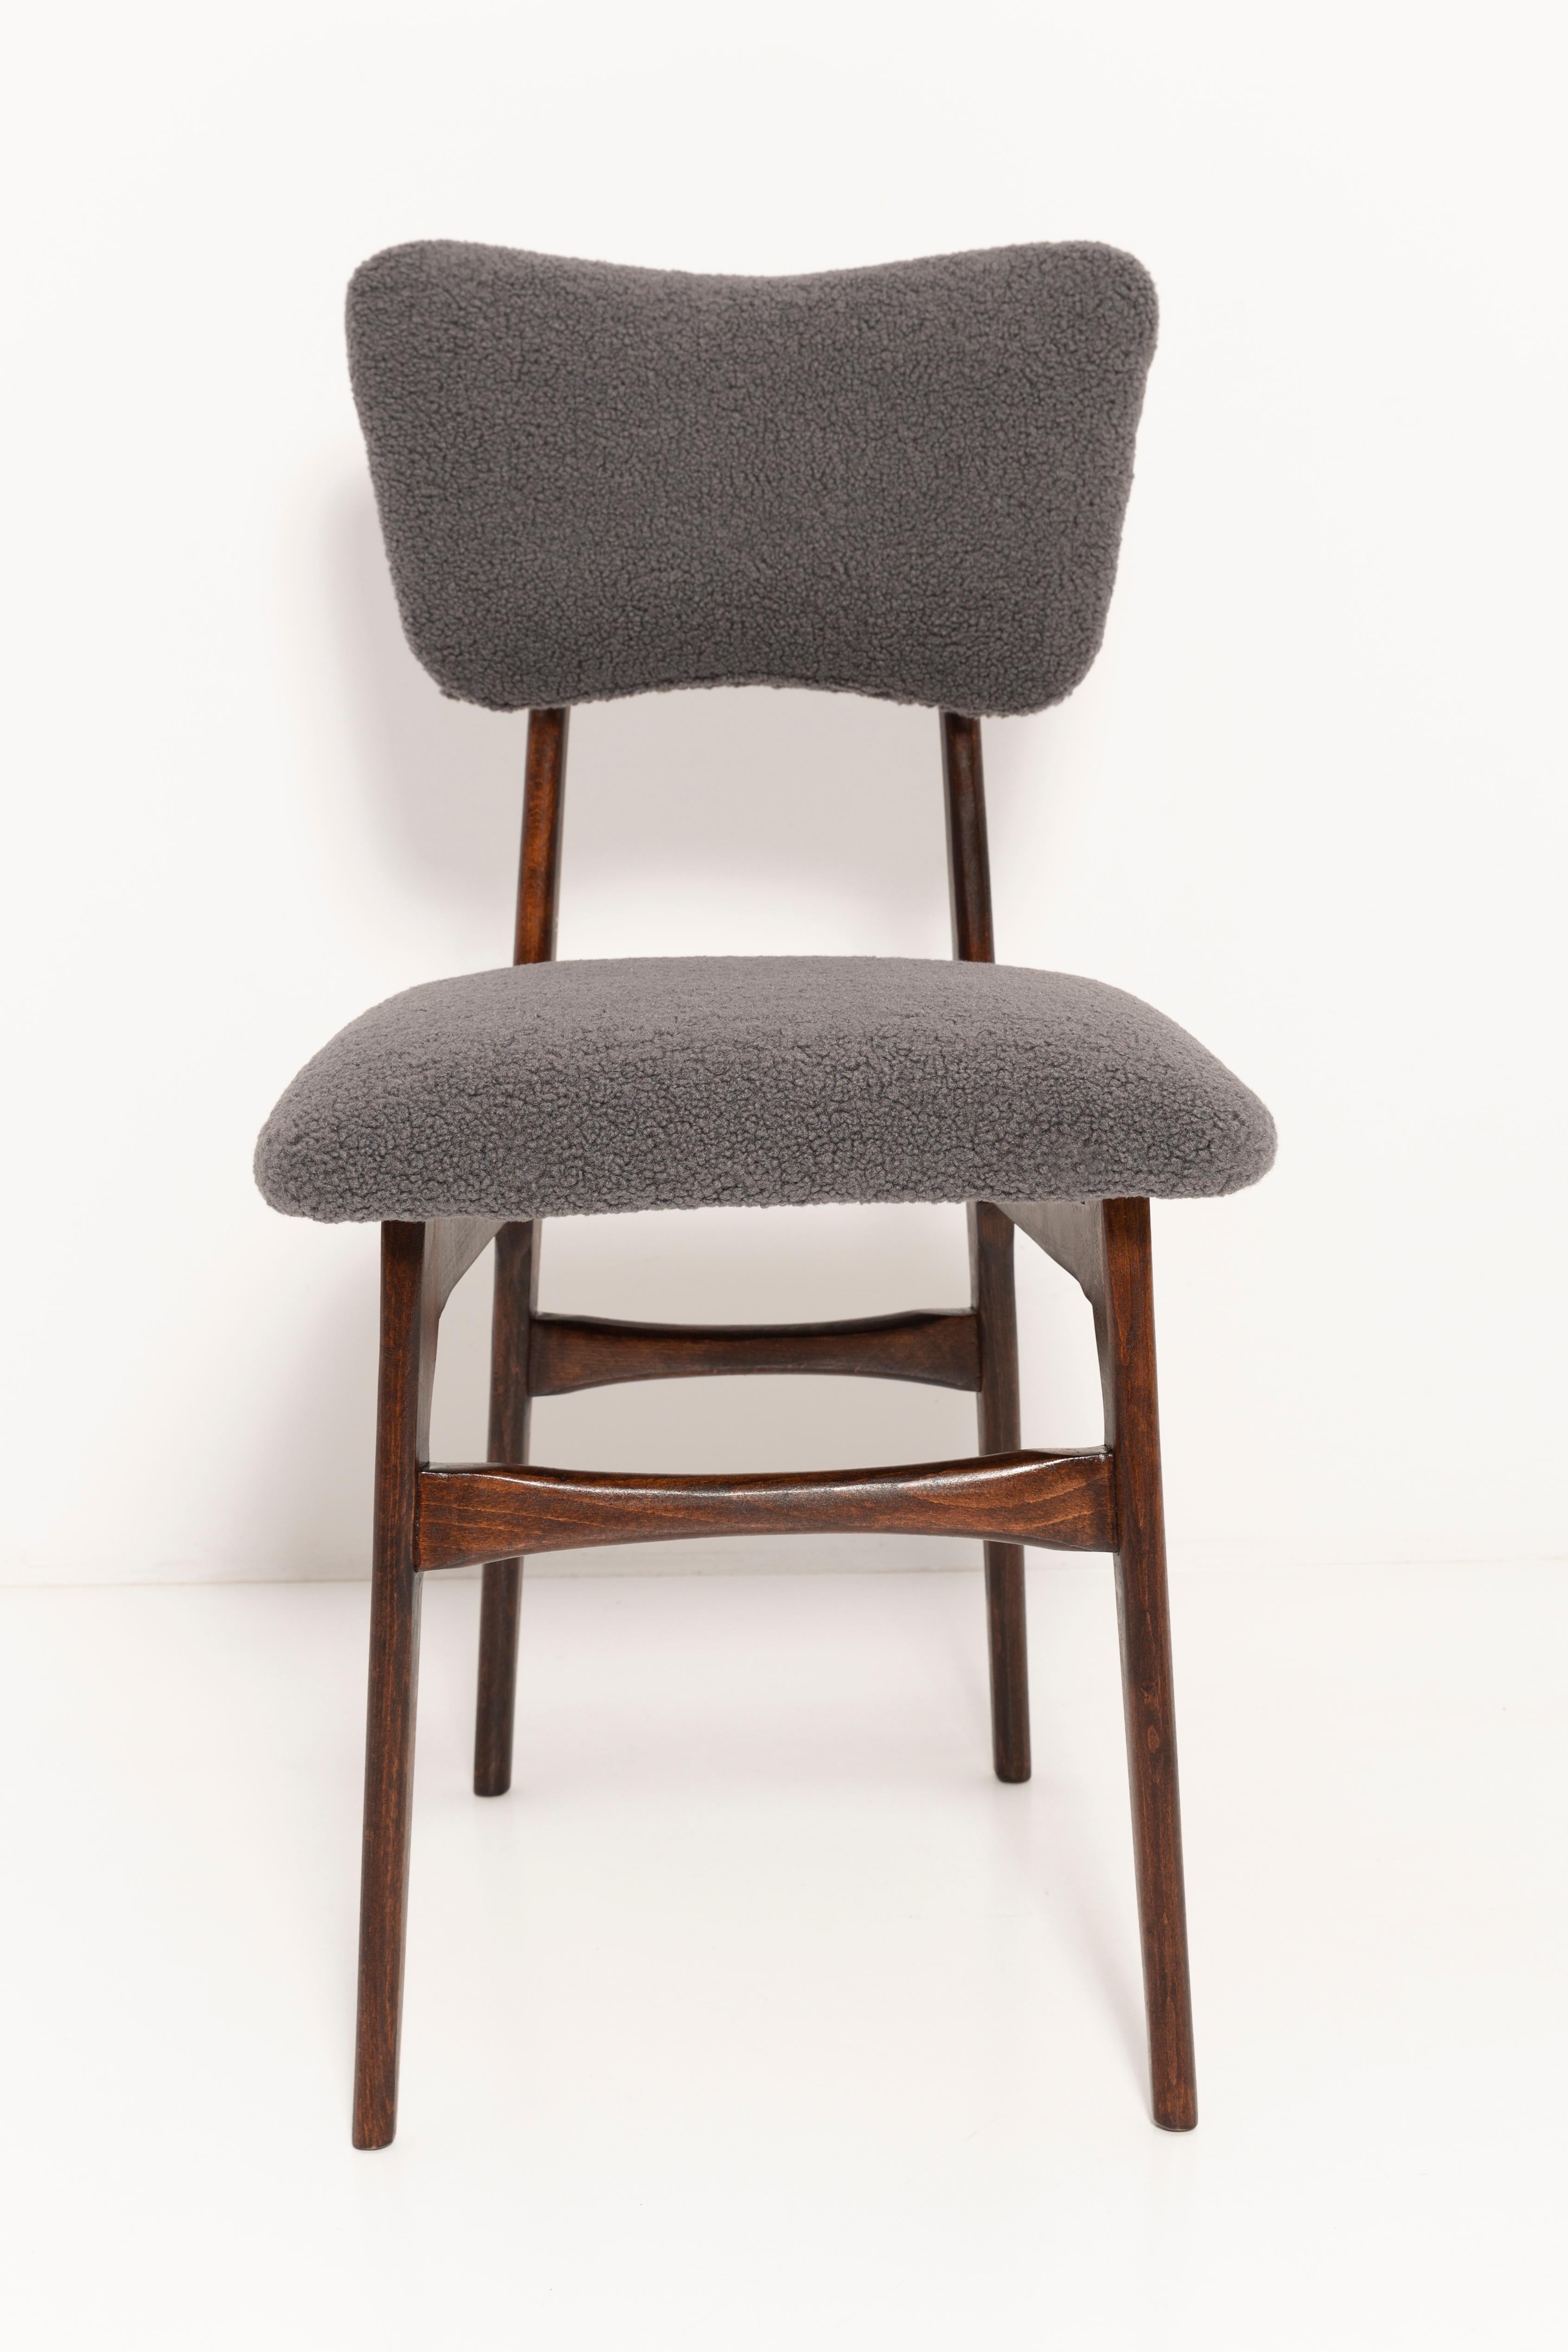 Set of Eight 20th Century Dark Gray Boucle Chairs, Europe, 1960s For Sale 4